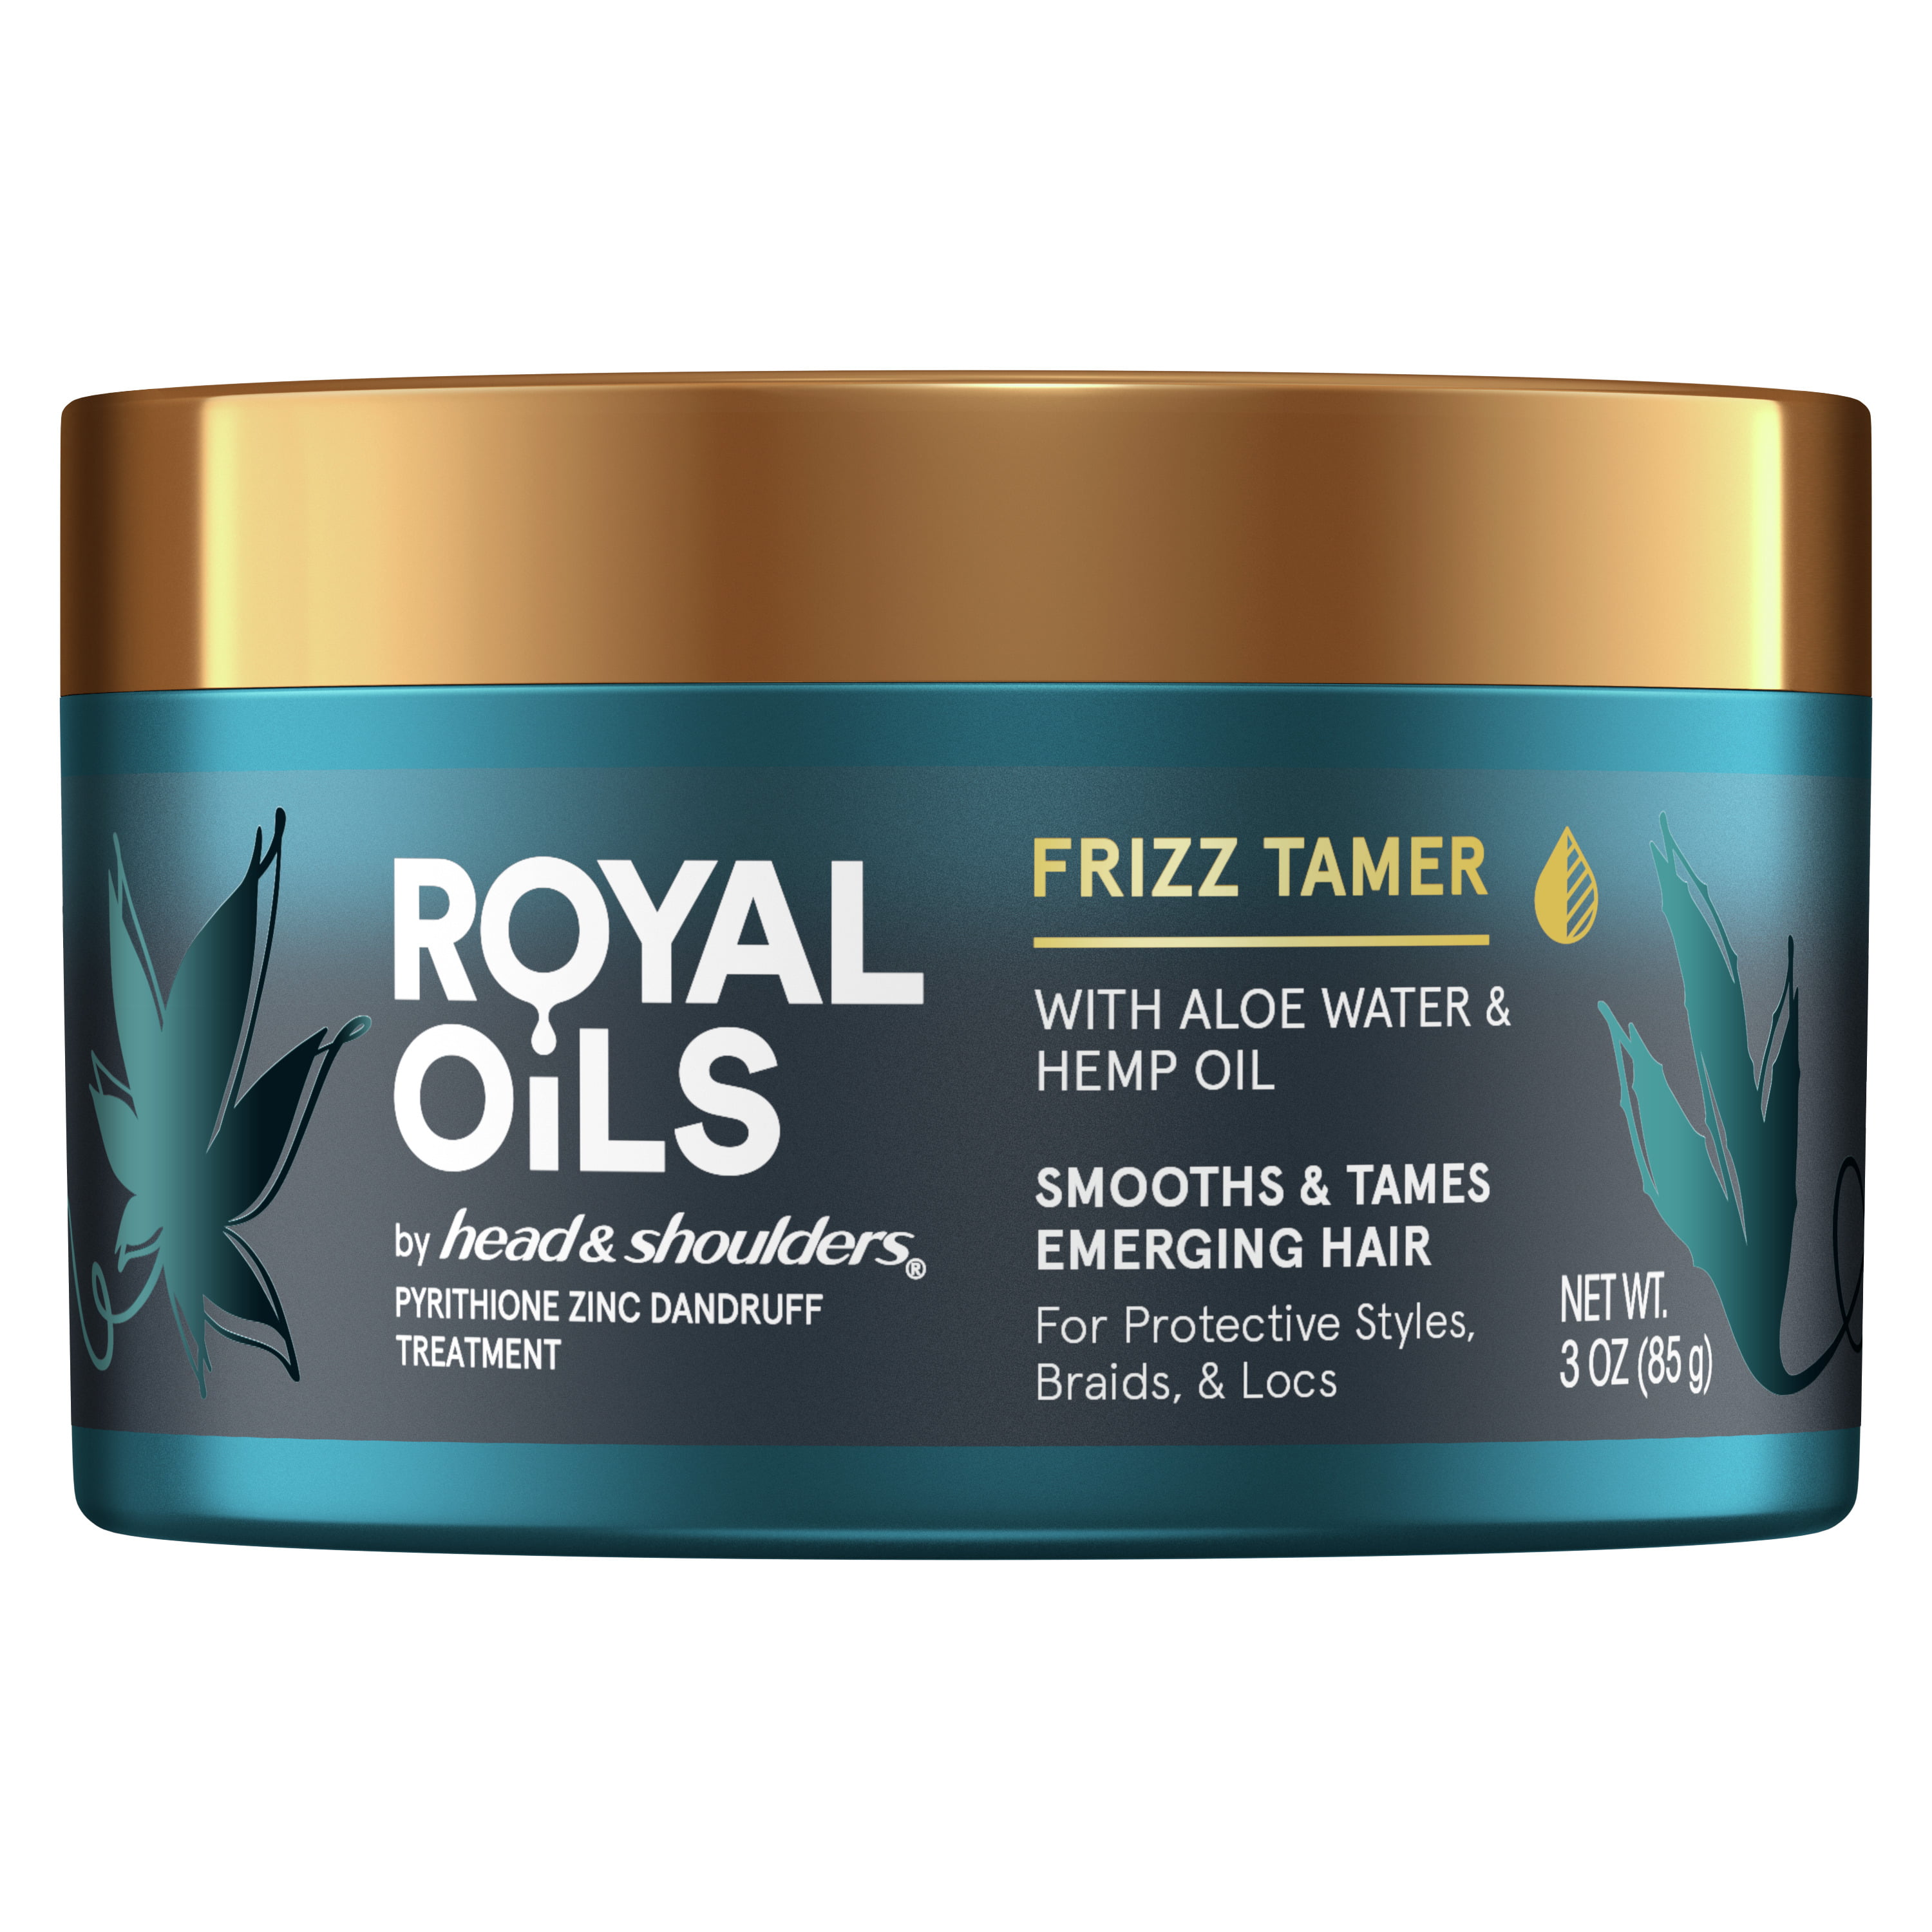 head-and-shoulders-royal-oils-frizz-tamer-sulfate-free-3-oz-walmart